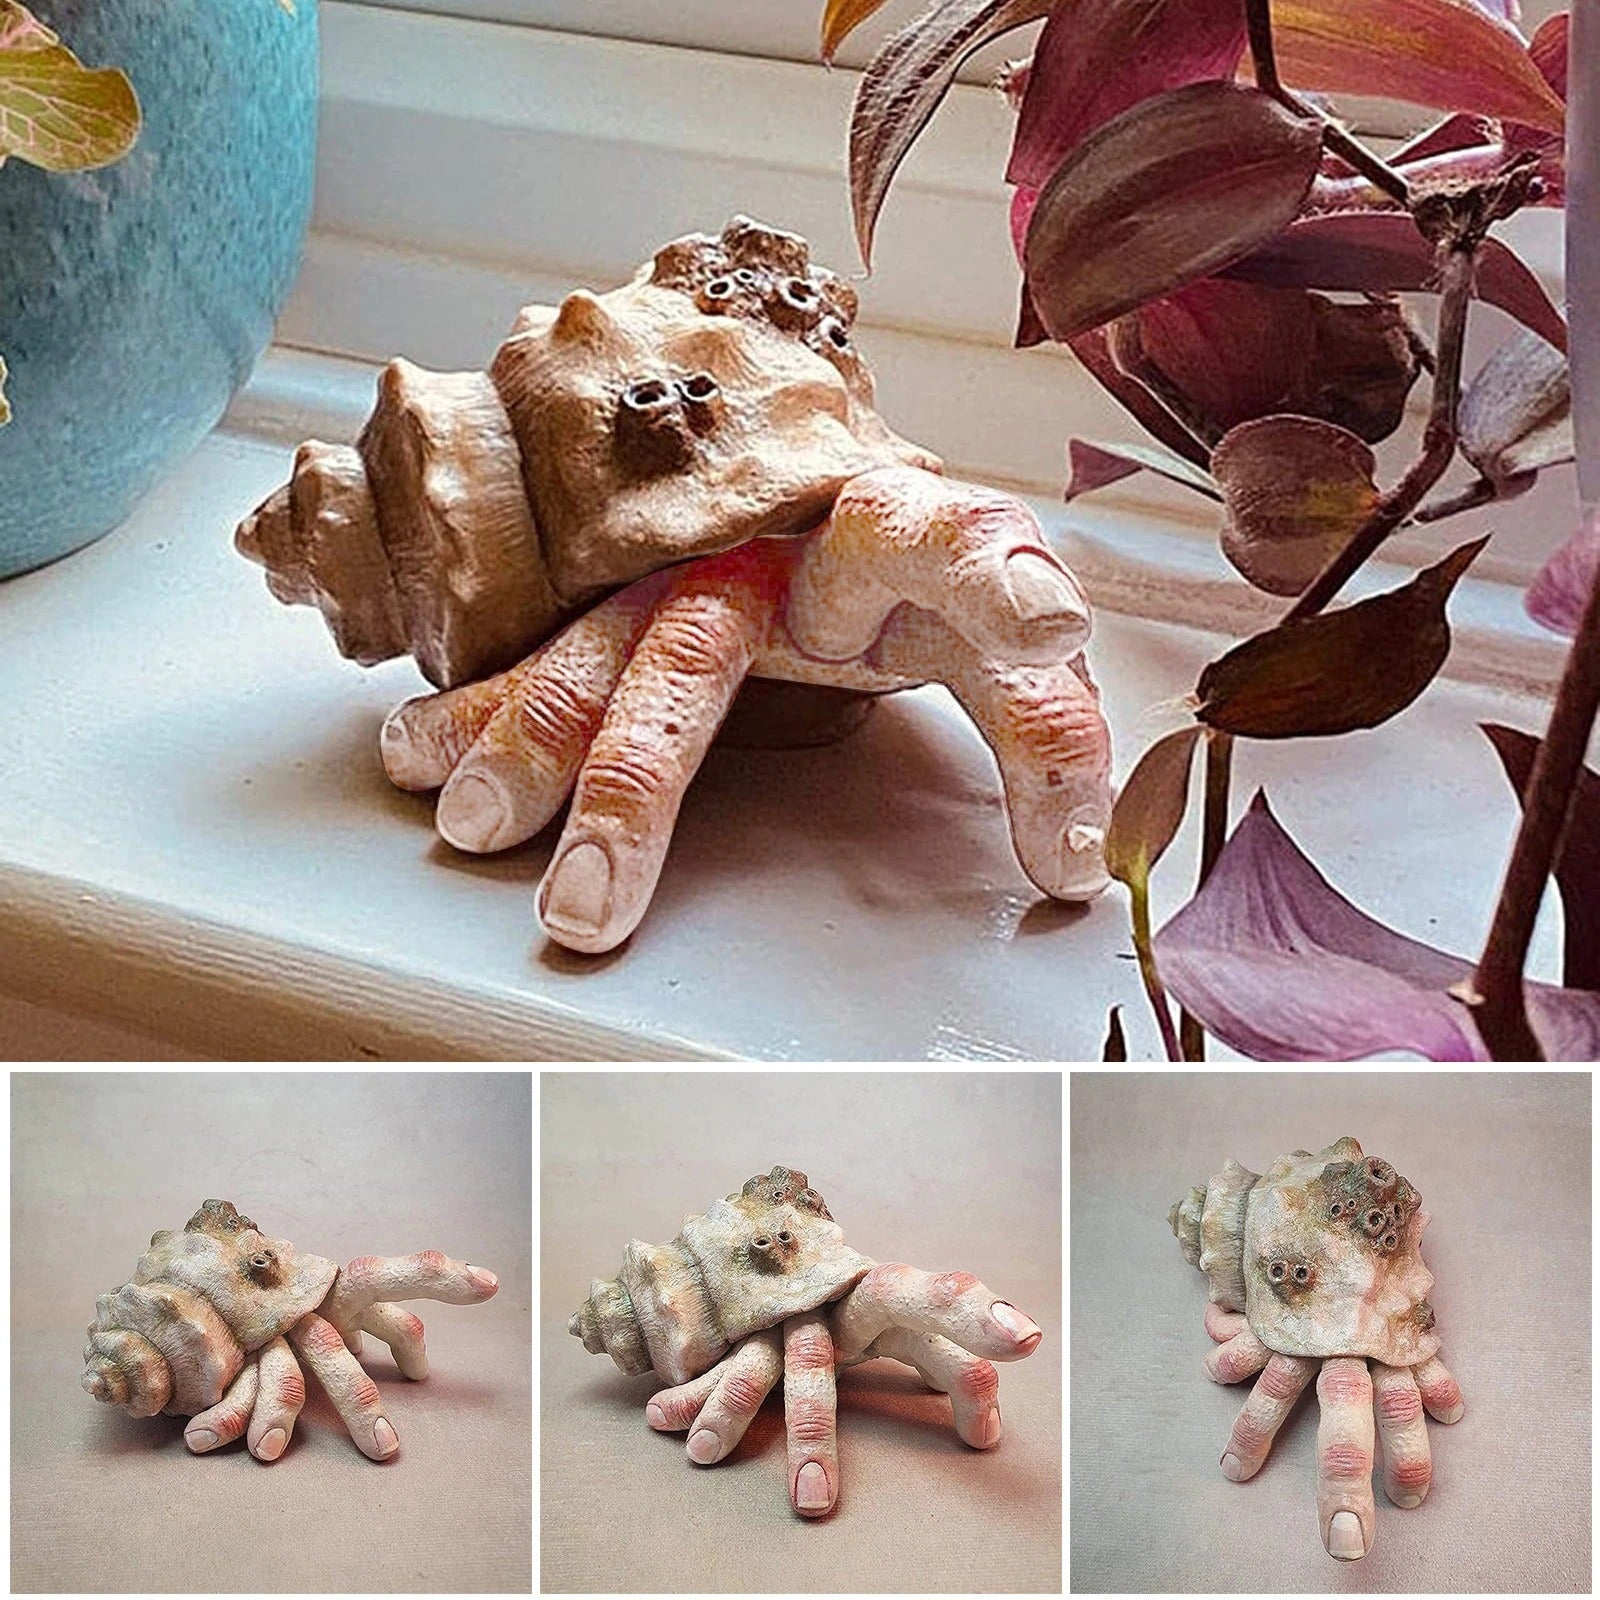 A collage of 4 images all showing a hermit crab finger sculpture. The sculpture has fingers coming out of the shell instead of a crab.